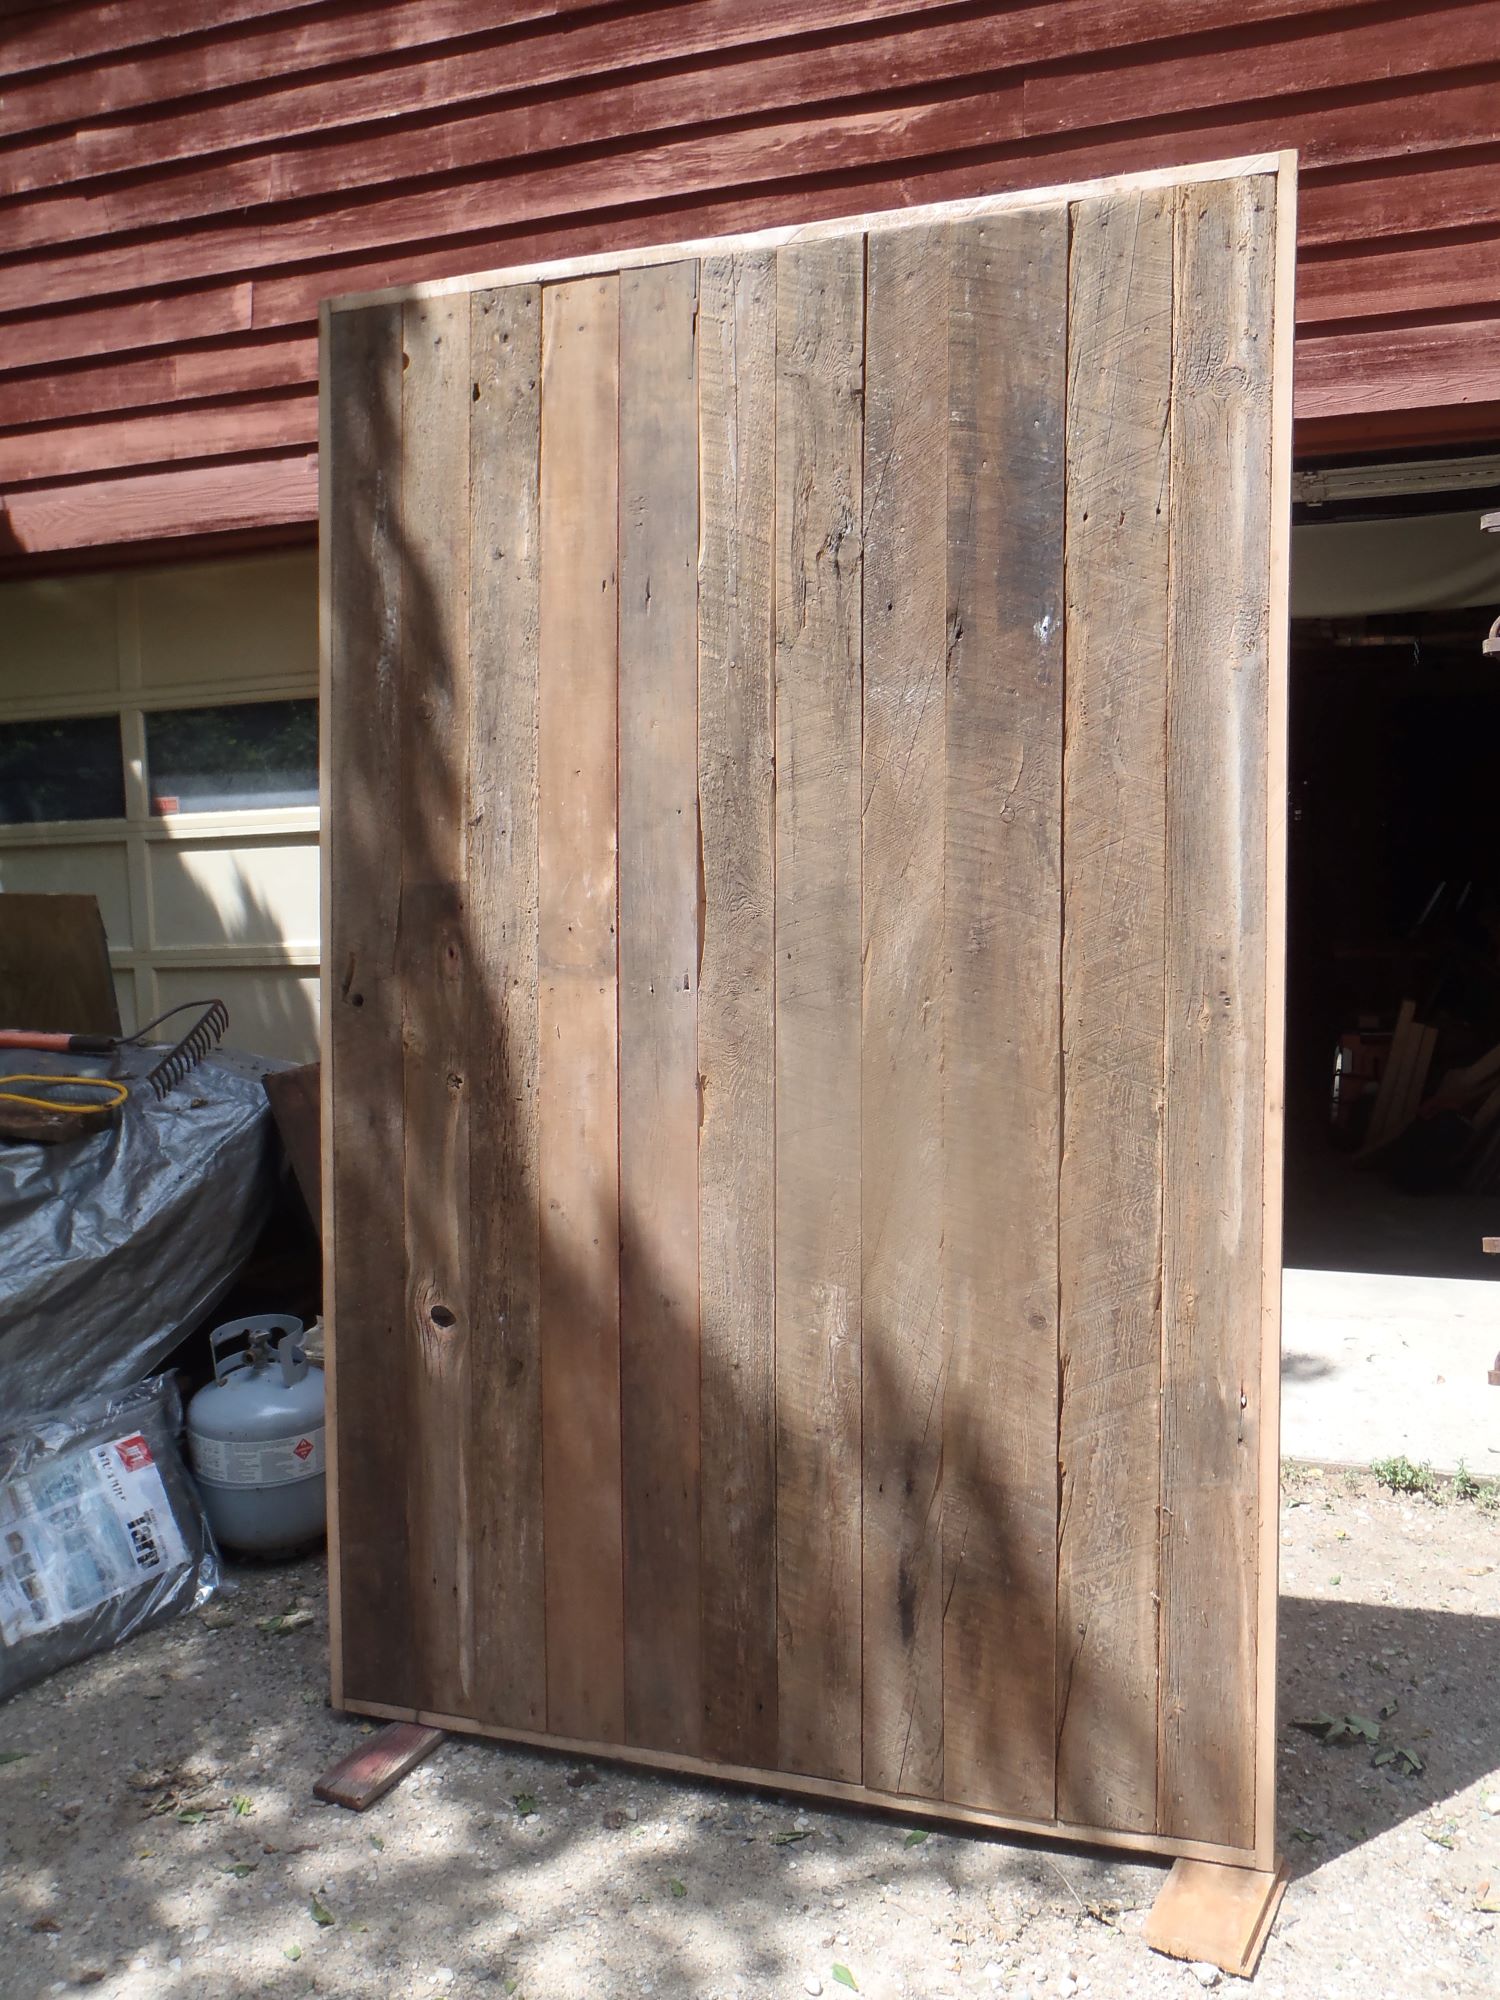 One of the first barnwood sliders Jim made